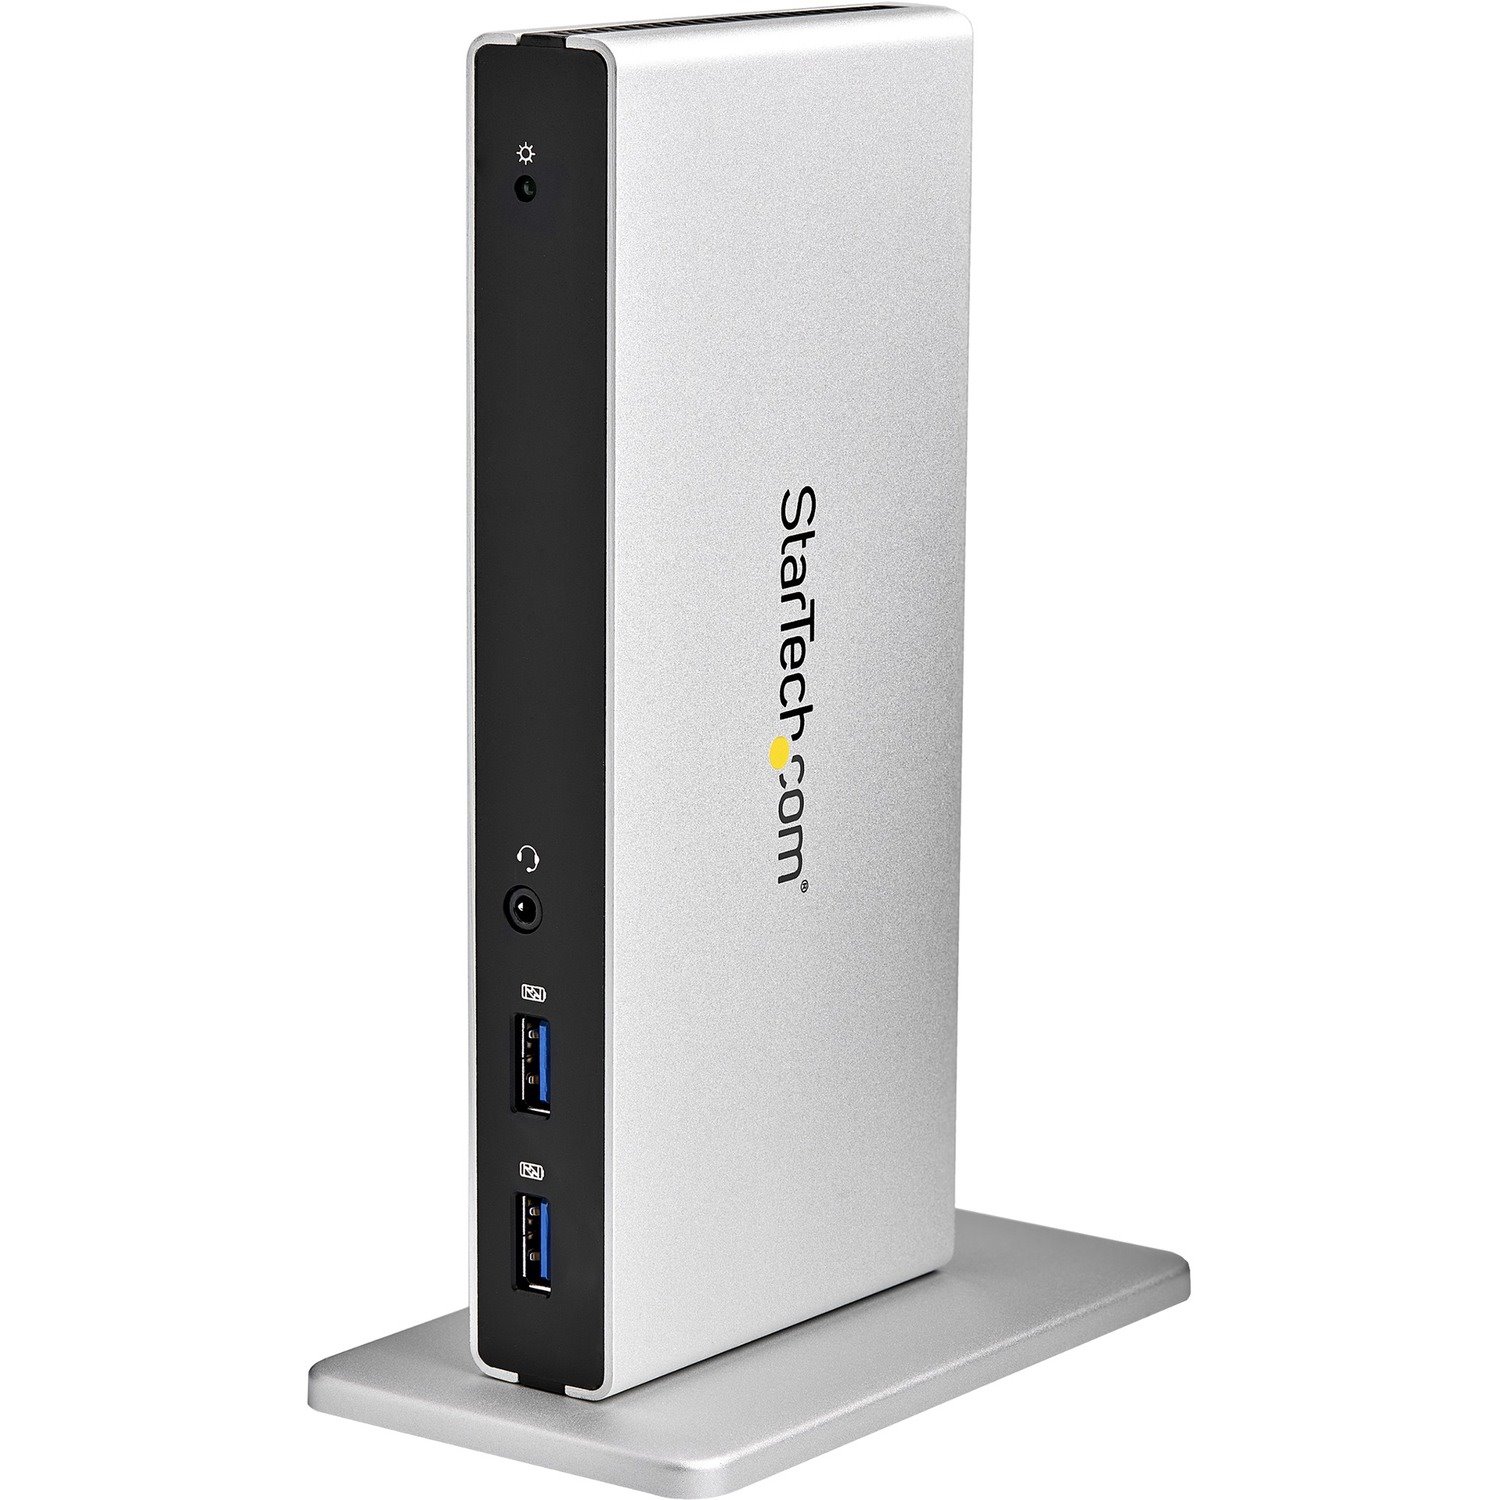 StarTech.com USB 3.0 Docking Station for Notebook - Charging Capability - Black, Silver